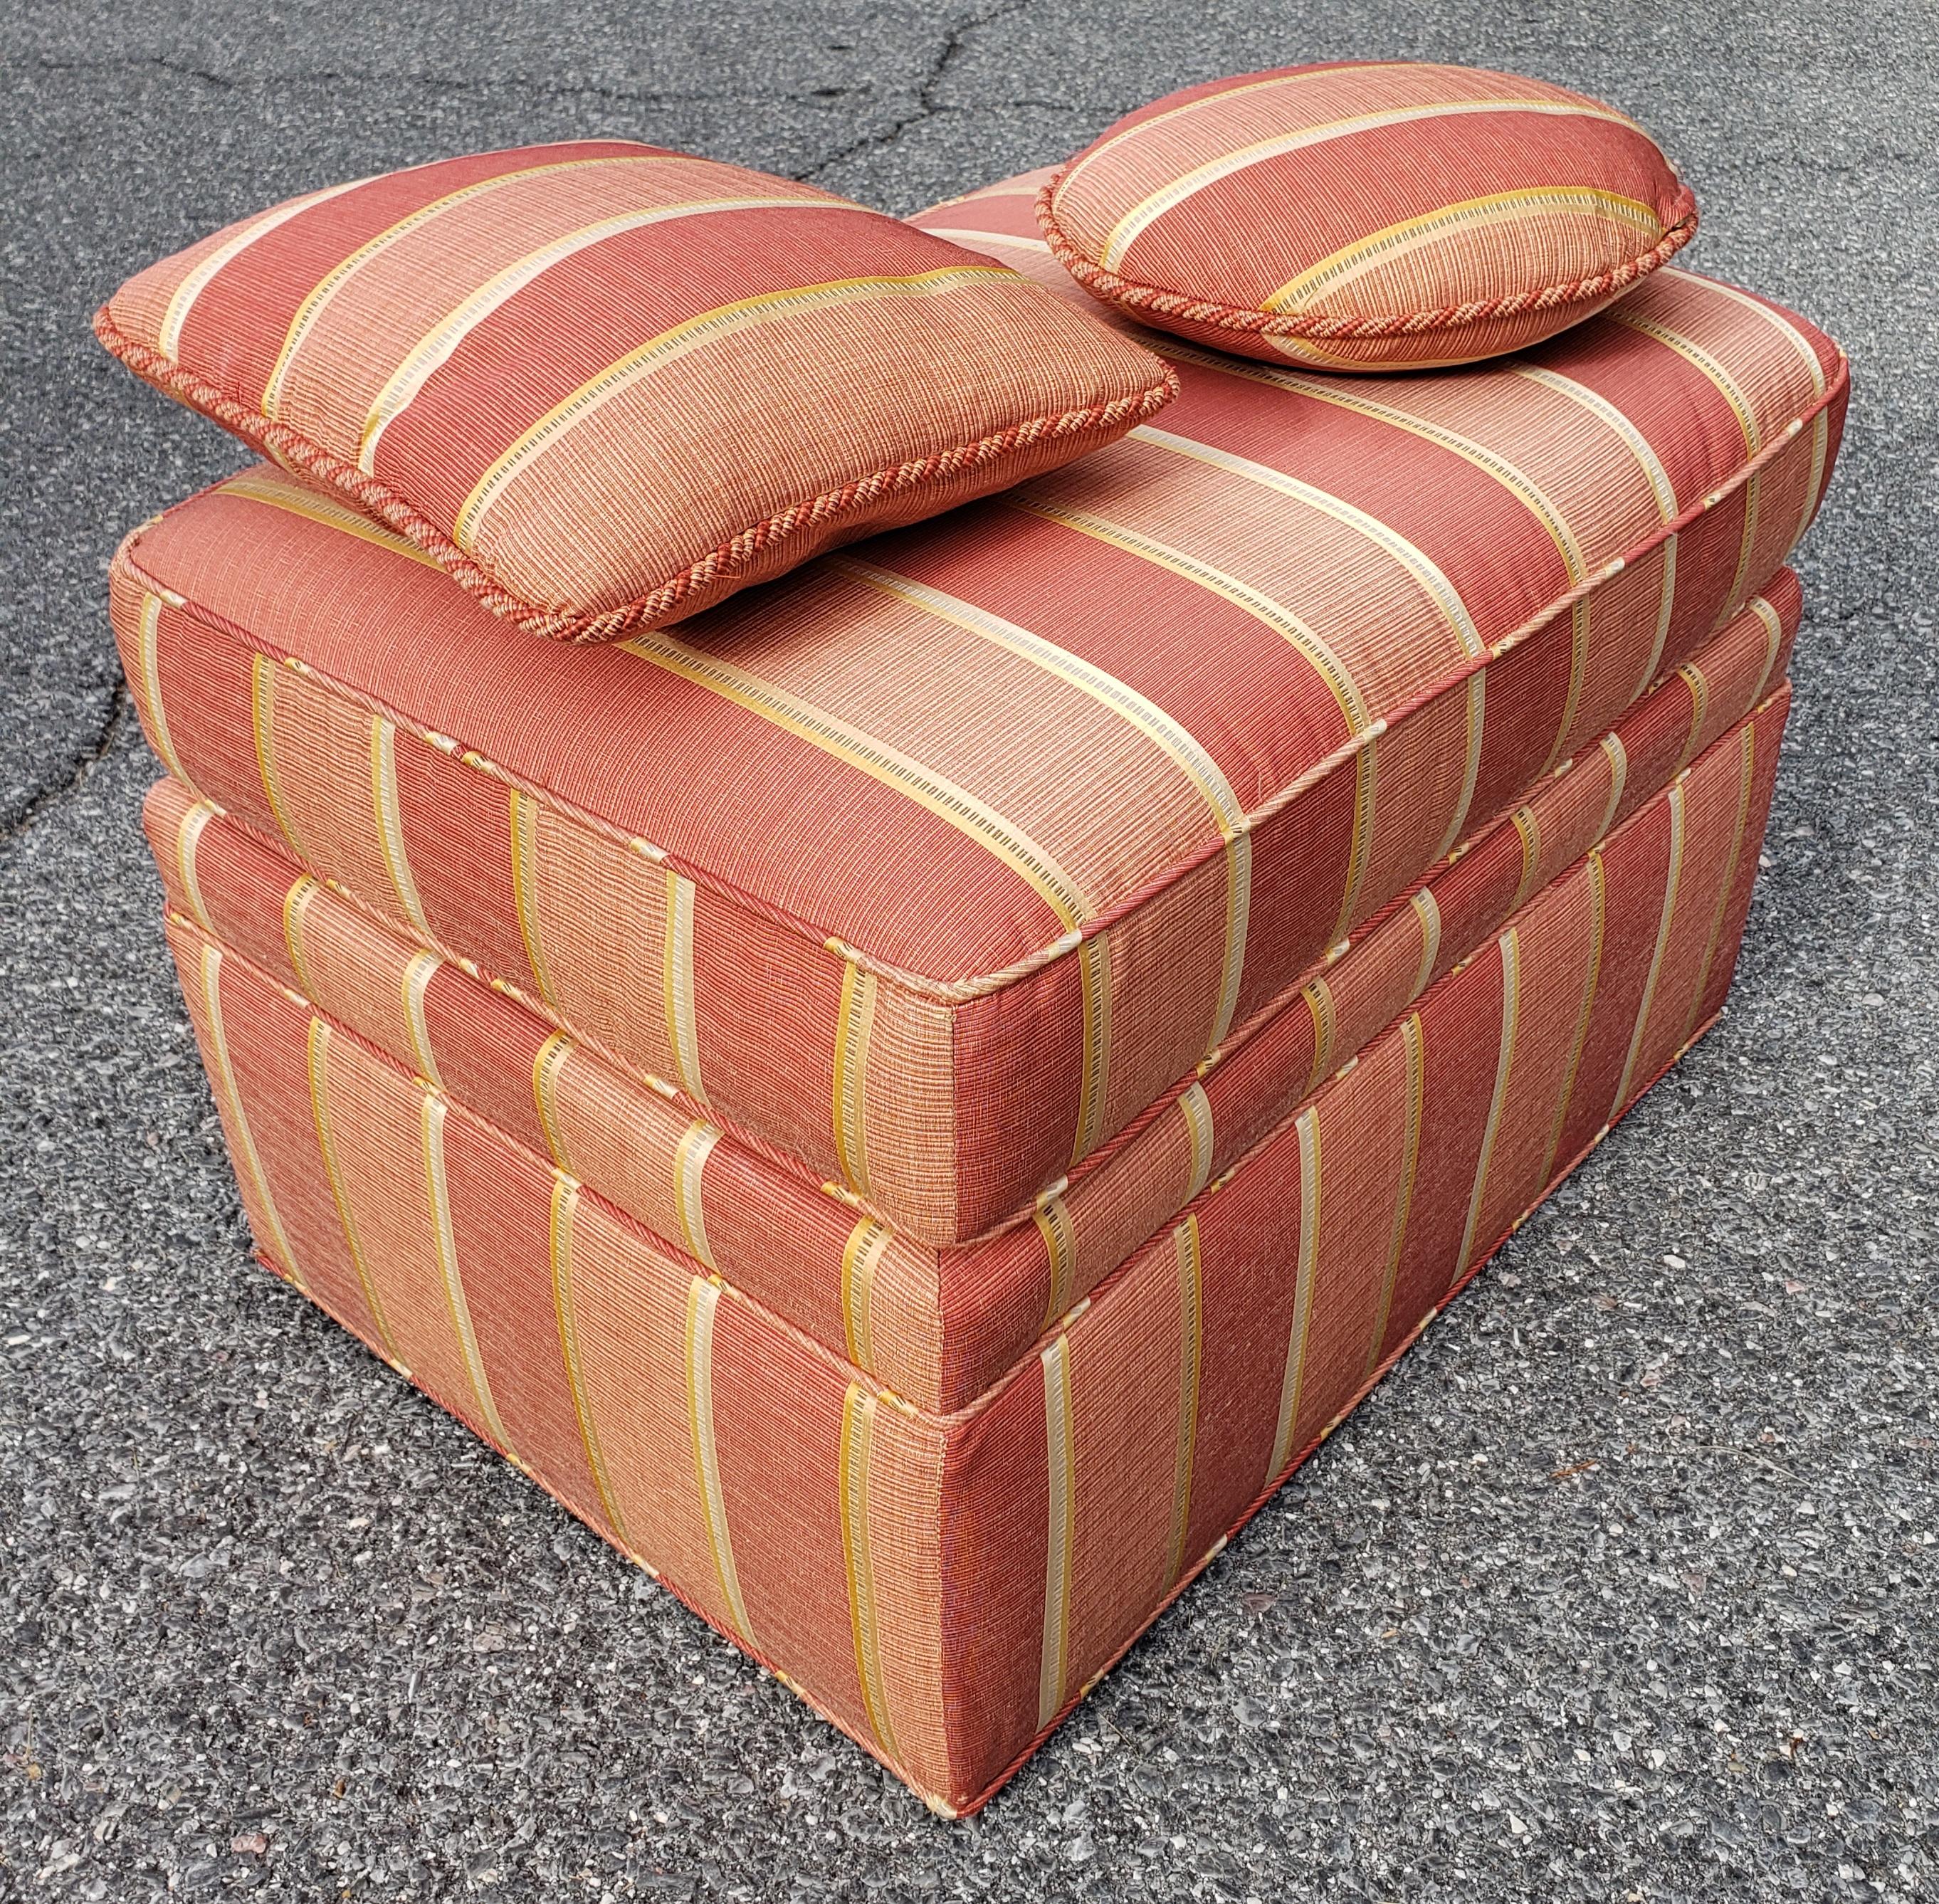 Modern Upholstered Rolling Ottoman with Two Matching Decorative Pillows In Excellent Condition For Sale In Germantown, MD